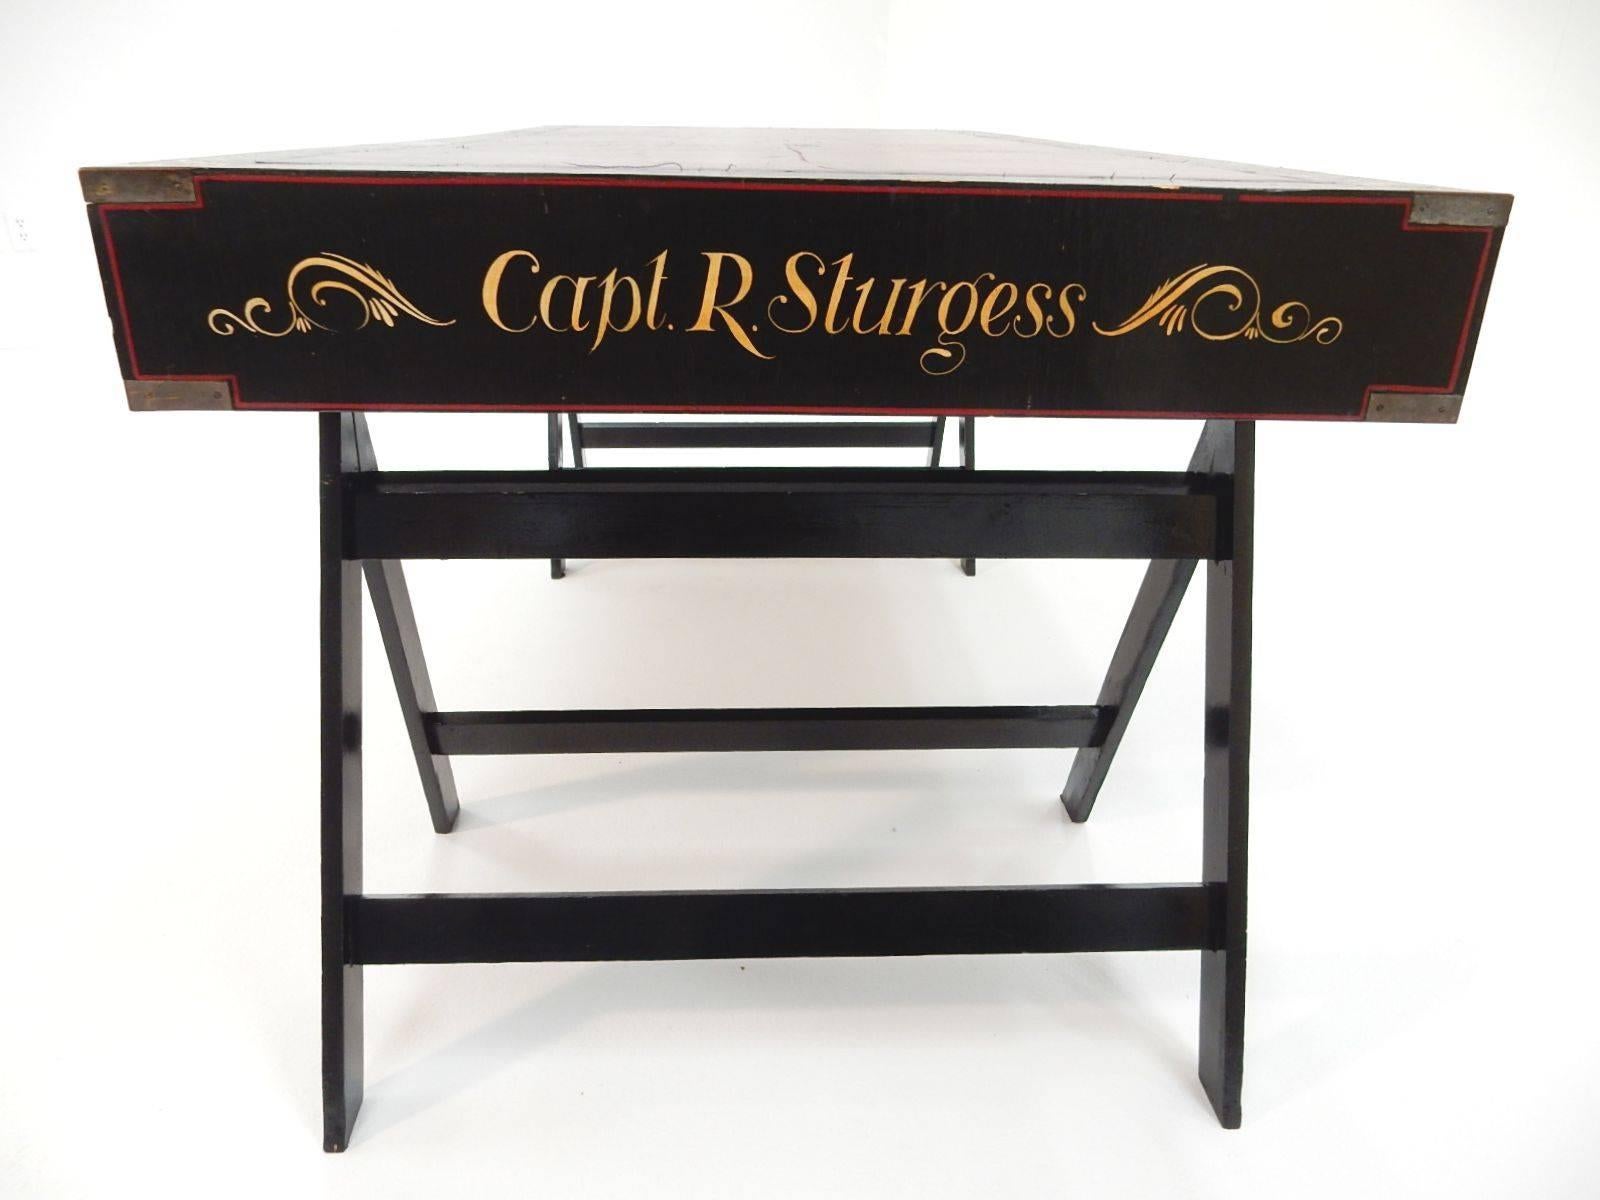 Authentic antique Campaign desk belonging to Captain R. Sturgess, circa early 1900s.
Completely original paint and dyed pigskin leather top on desk.
Three drawers marked 